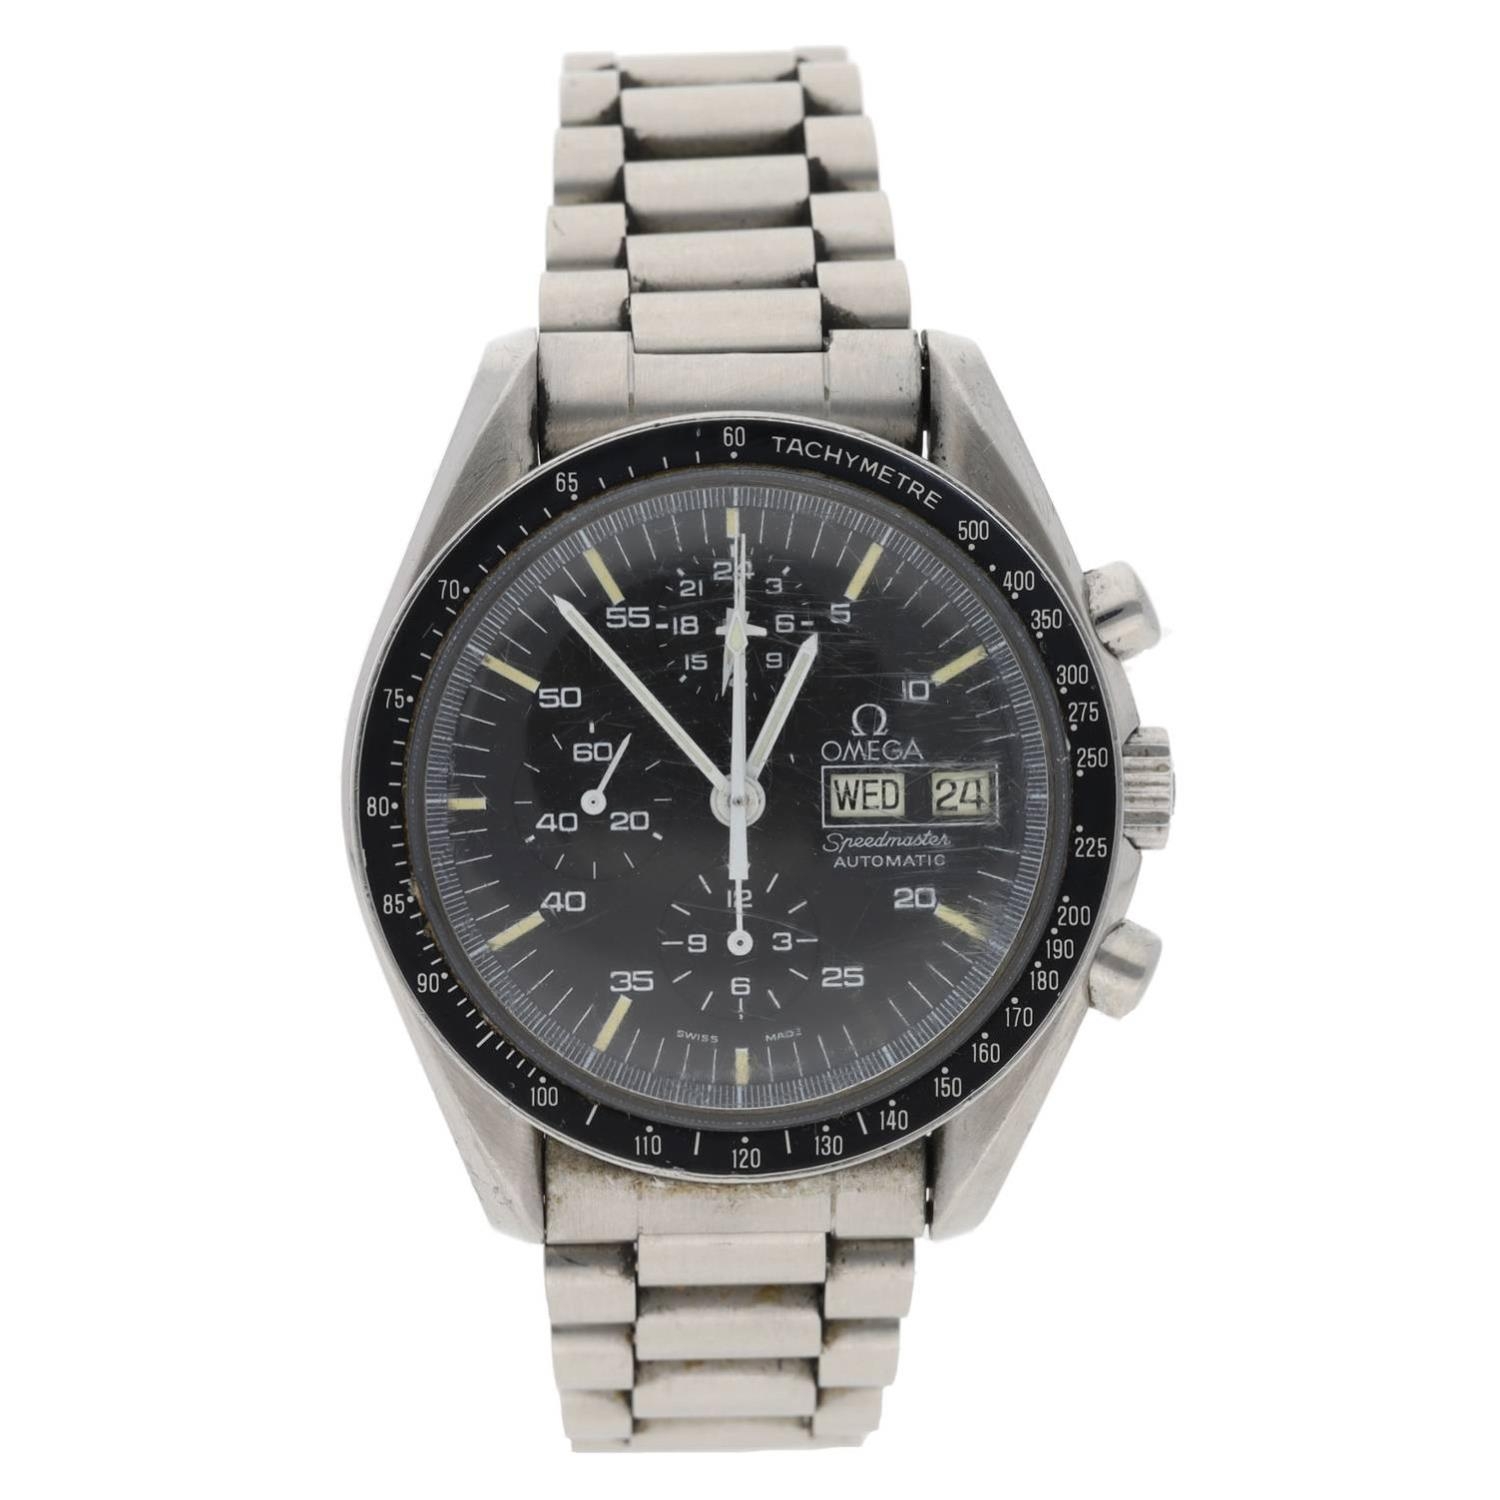 Rare Omega Speedmaster 'Holy Grail' Chronograph automatic stainless steel gentleman's wristwatch, - Image 2 of 9